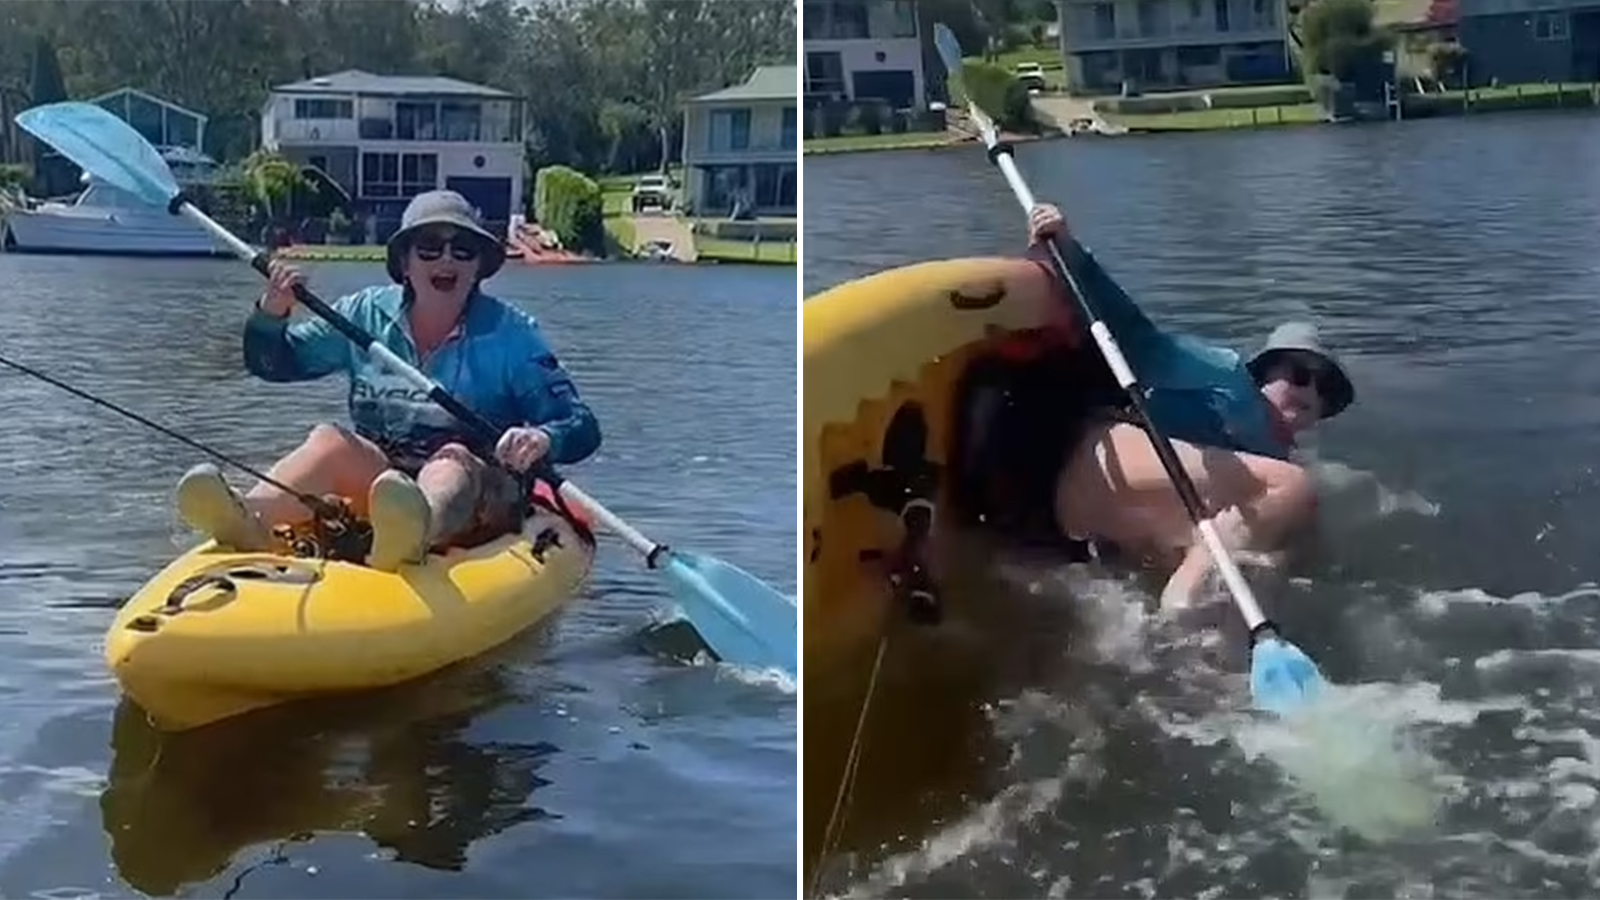 ‘Karen’ kayaker capsizes in heated confrontation with boater going viral